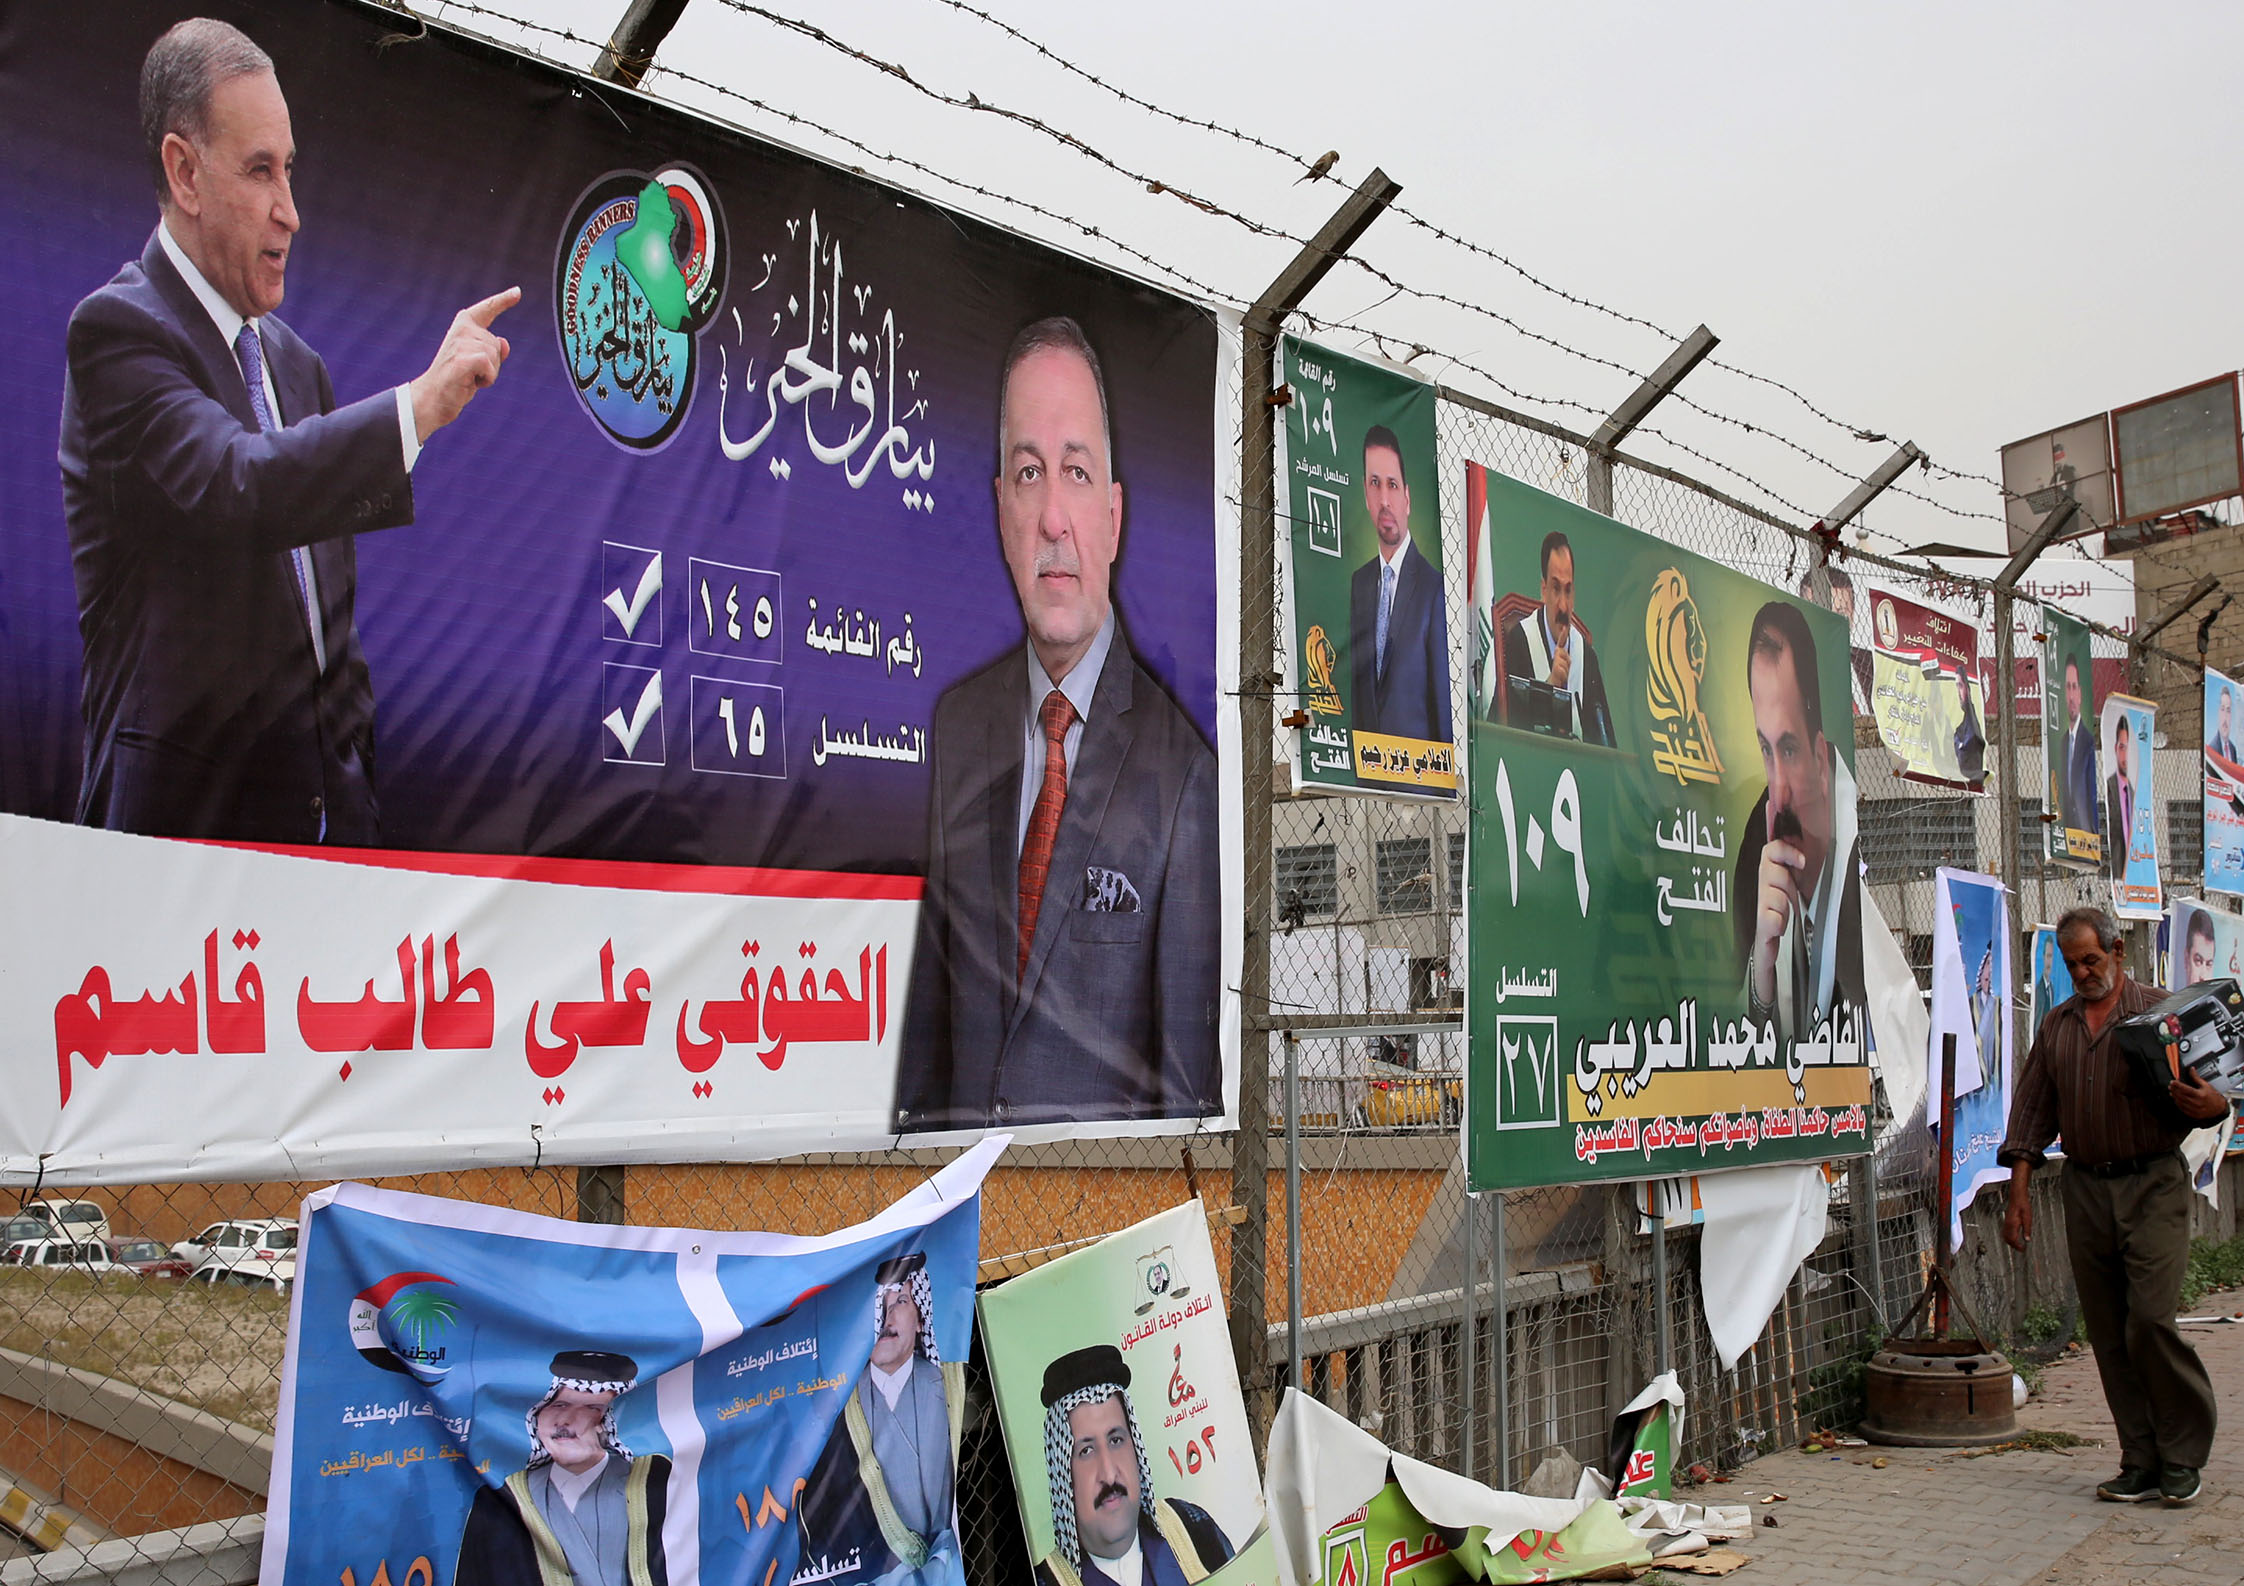 Posters of candidates in Iraq's upcoming parliamentary elections are seen with Arabic slogans in the streets of Baghdad on May 8, 2018. (Sabah Arar—AFP/Getty Images)